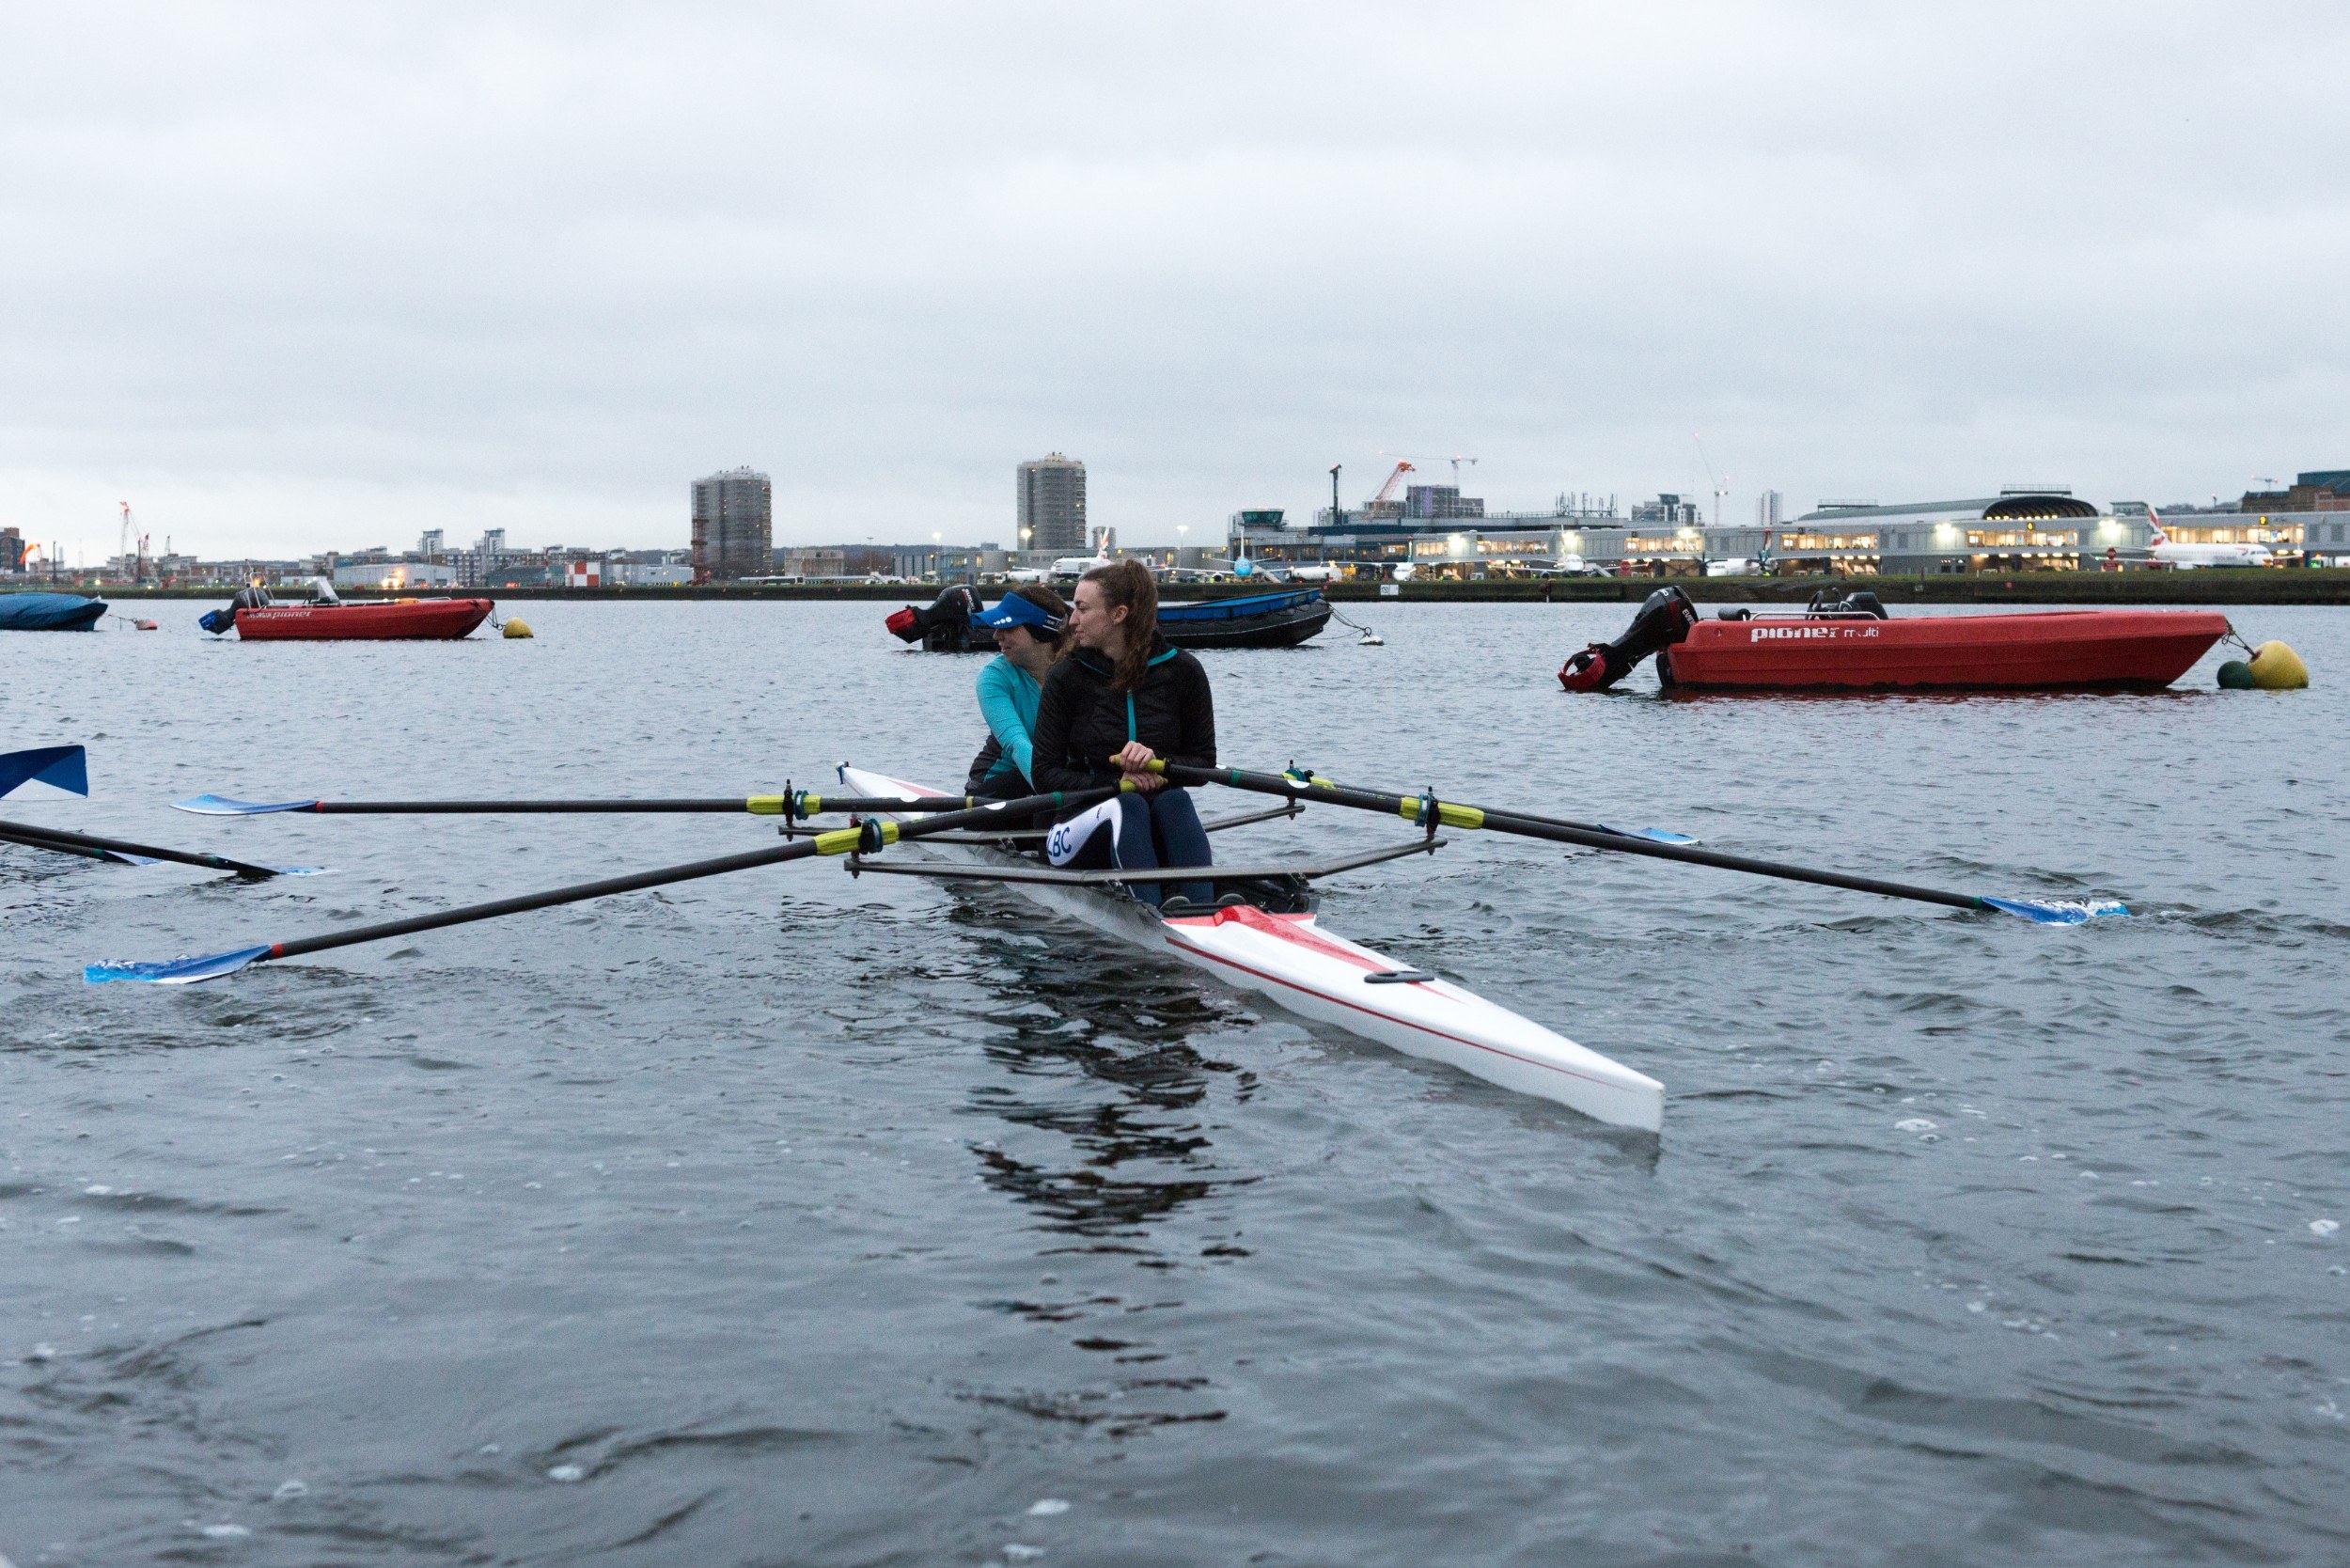 Two women rowing with other boats in the background